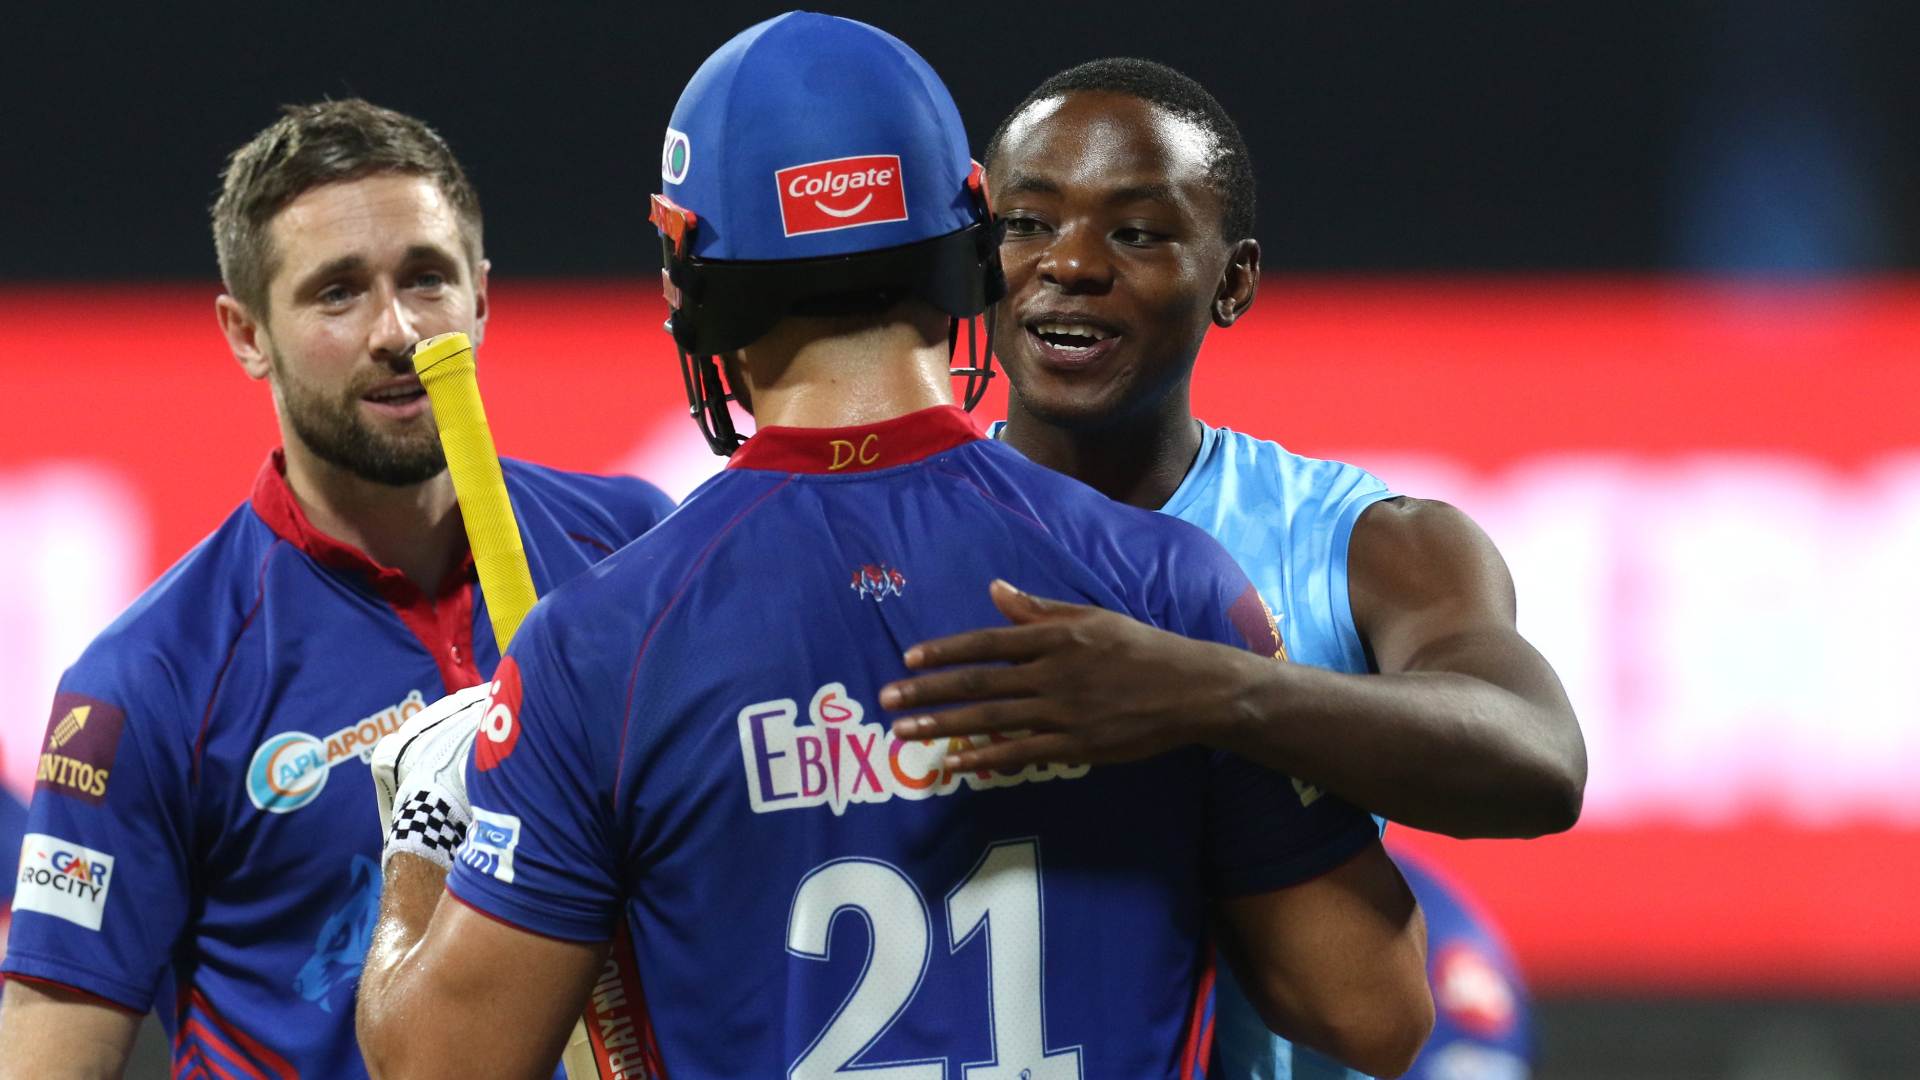 Delhi Capitals would be determined to snap their losing streak against Mumbai Indians.